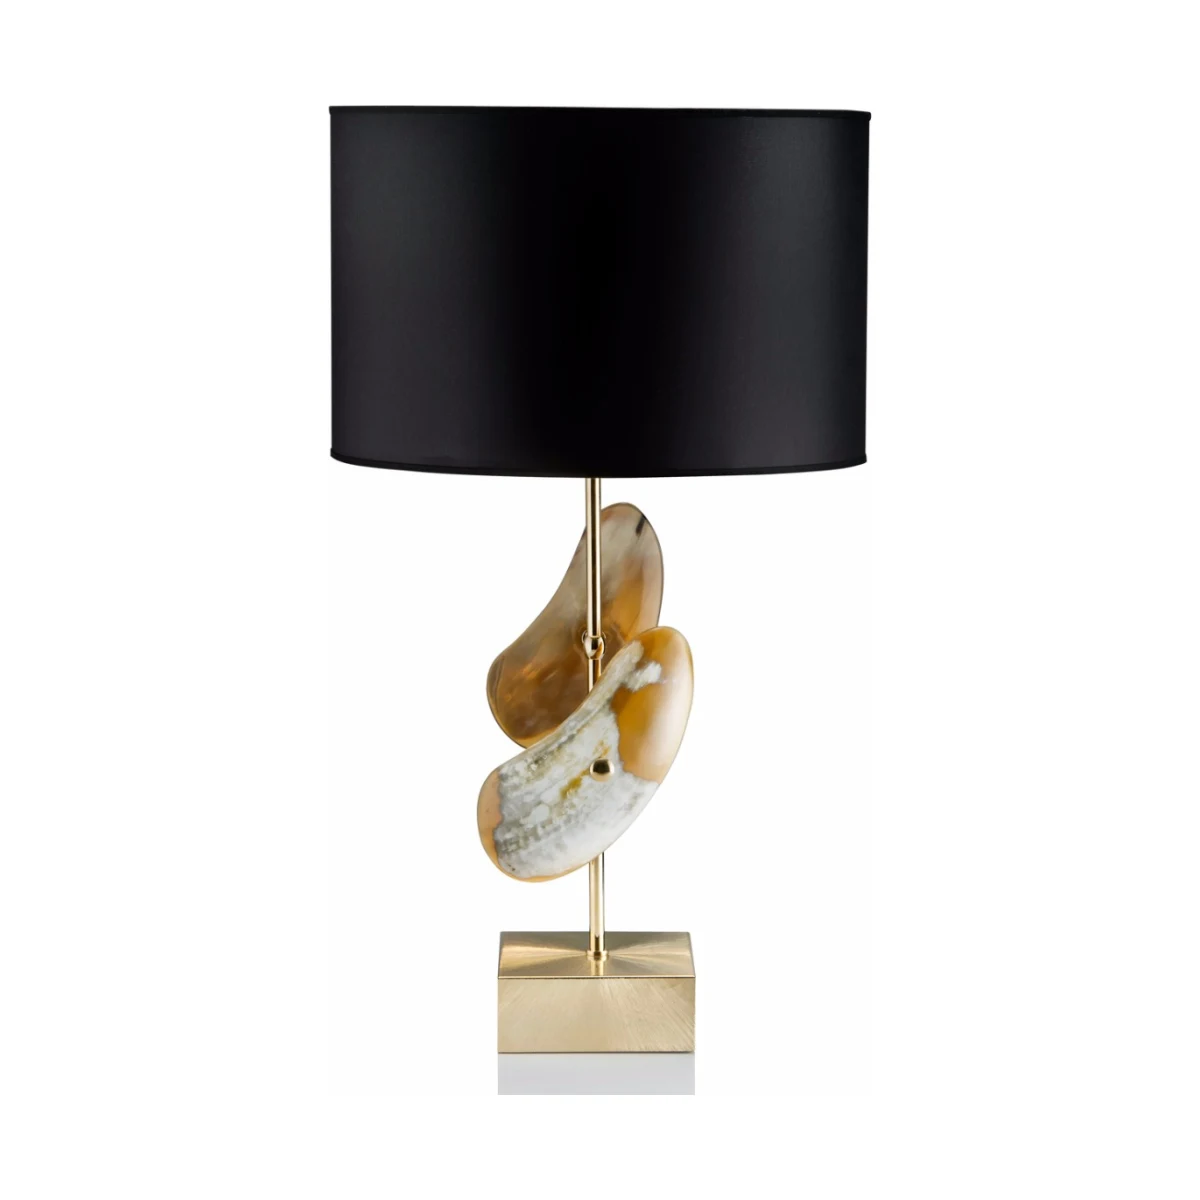 Luxury furniture table lamp with gold detailing at Luxuria London